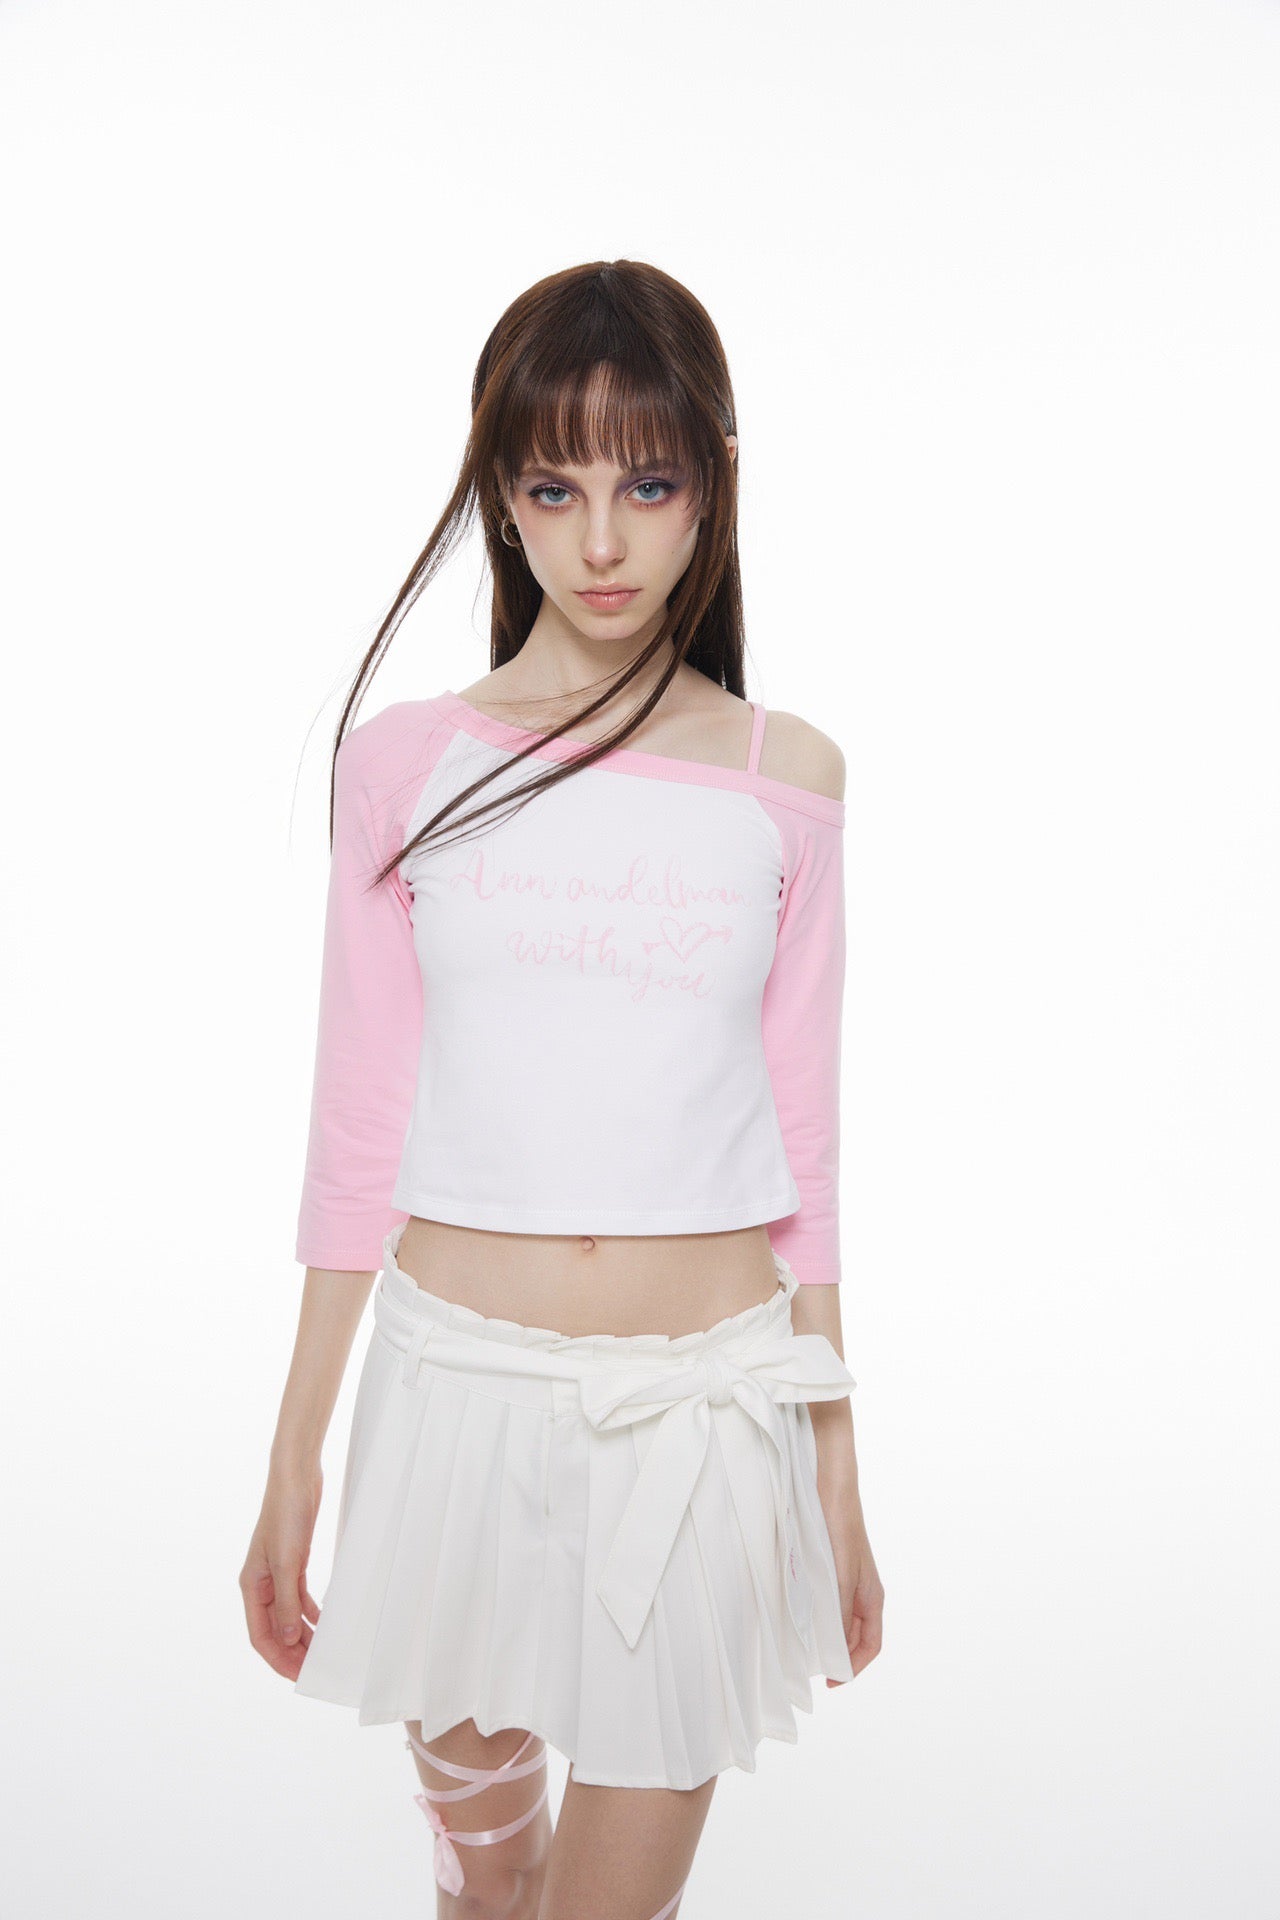 ANN ANDELMAN Pink 520 Limited Suspender With Shoulder Mid-Long Sleeve T-shirt | MADA IN CHINA